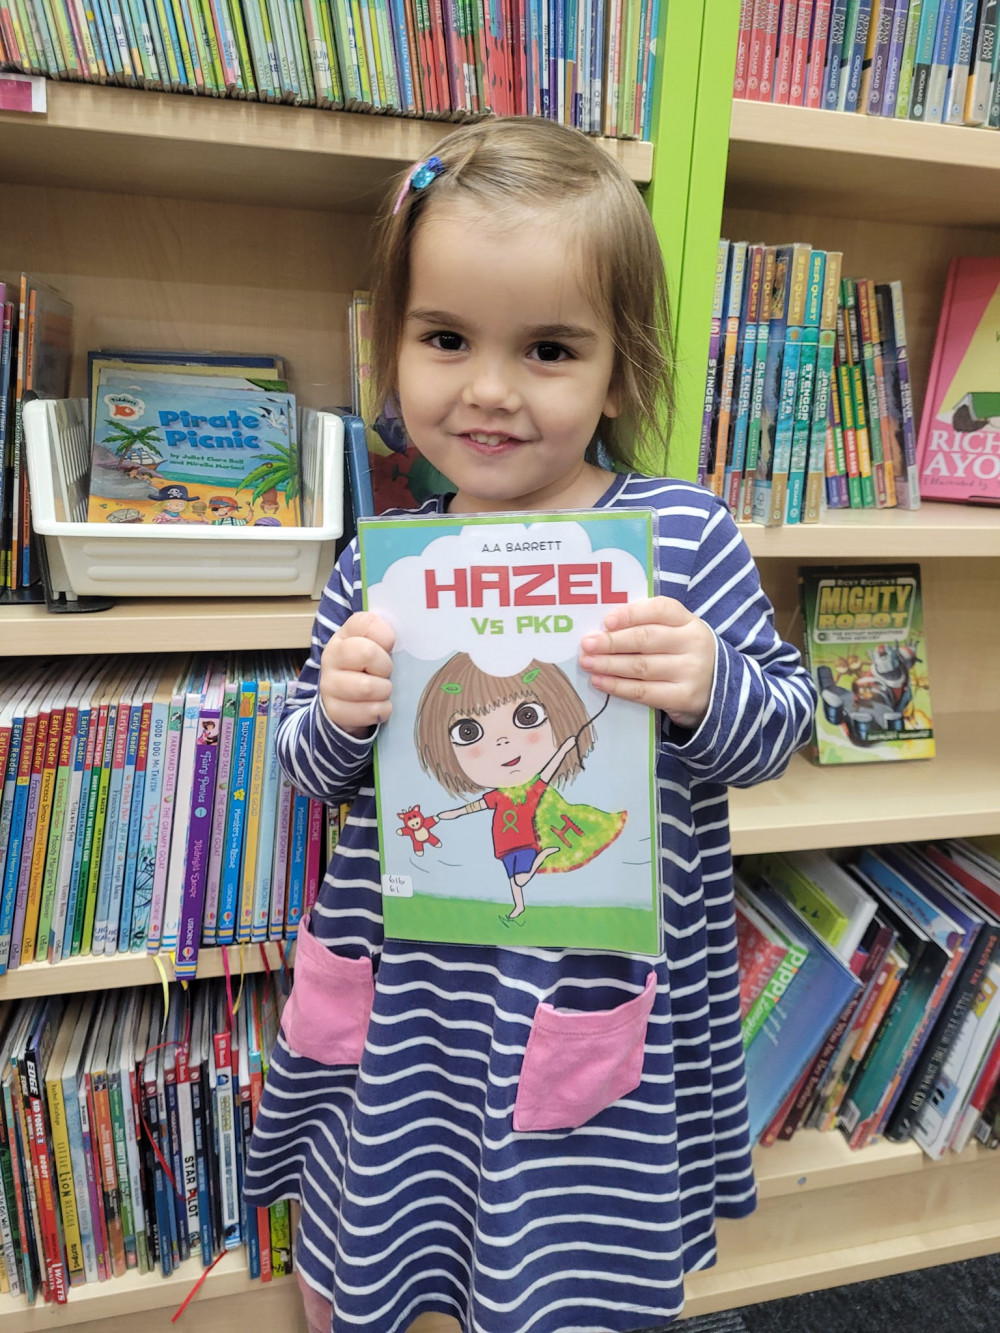  Four year old Hazel proudly holding a library copy of the book Hazel Vs PKD 